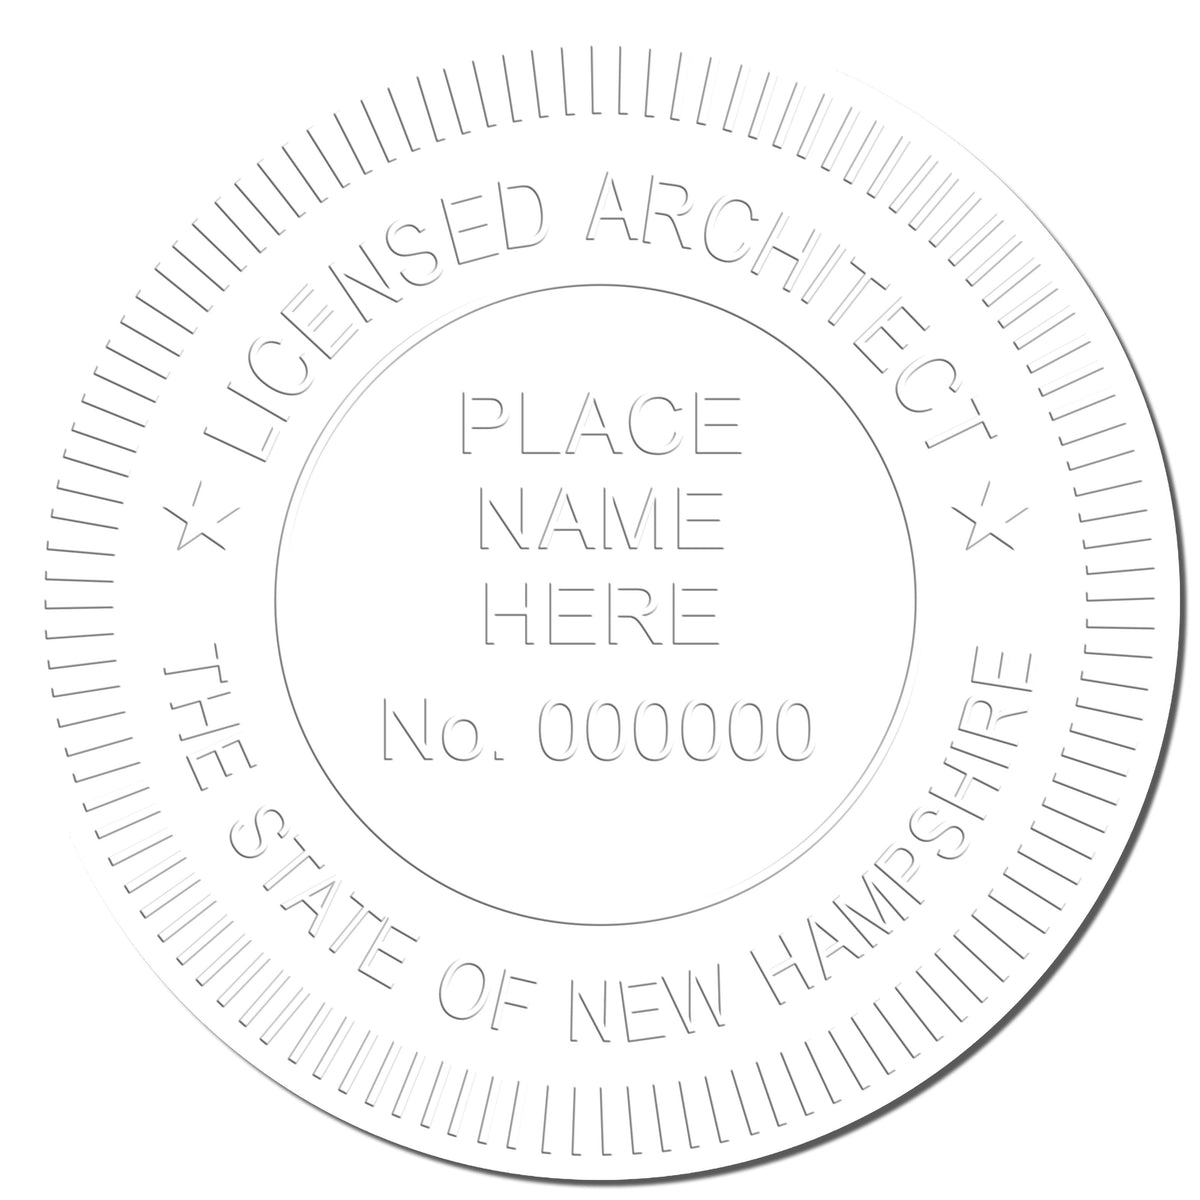 A photograph of the Handheld New Hampshire Architect Seal Embosser stamp impression reveals a vivid, professional image of the on paper.